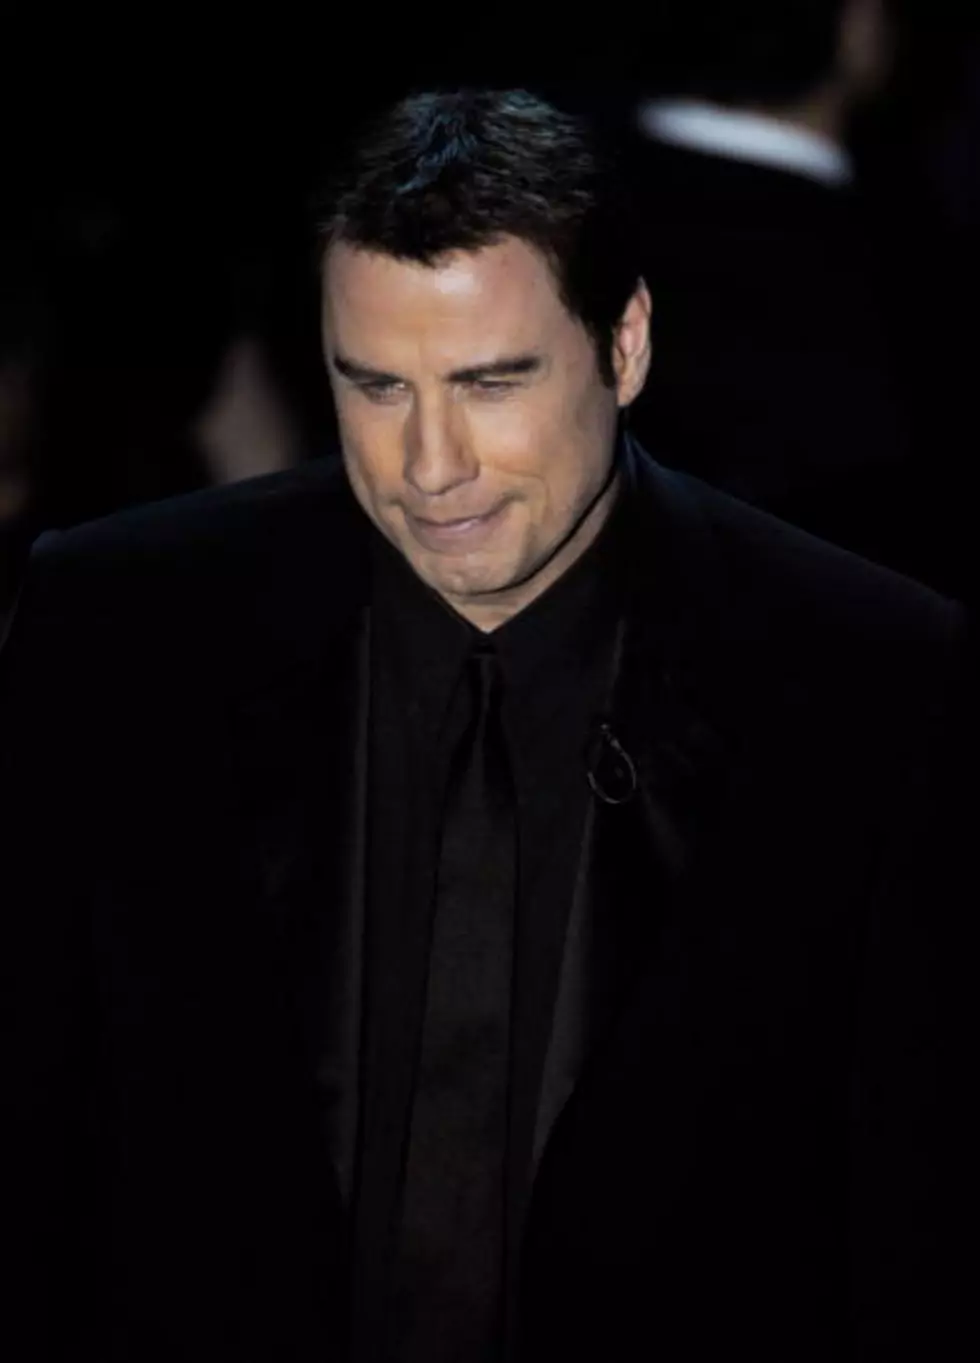 John Travolta Now Has Something in Common With…Darth Vader?!